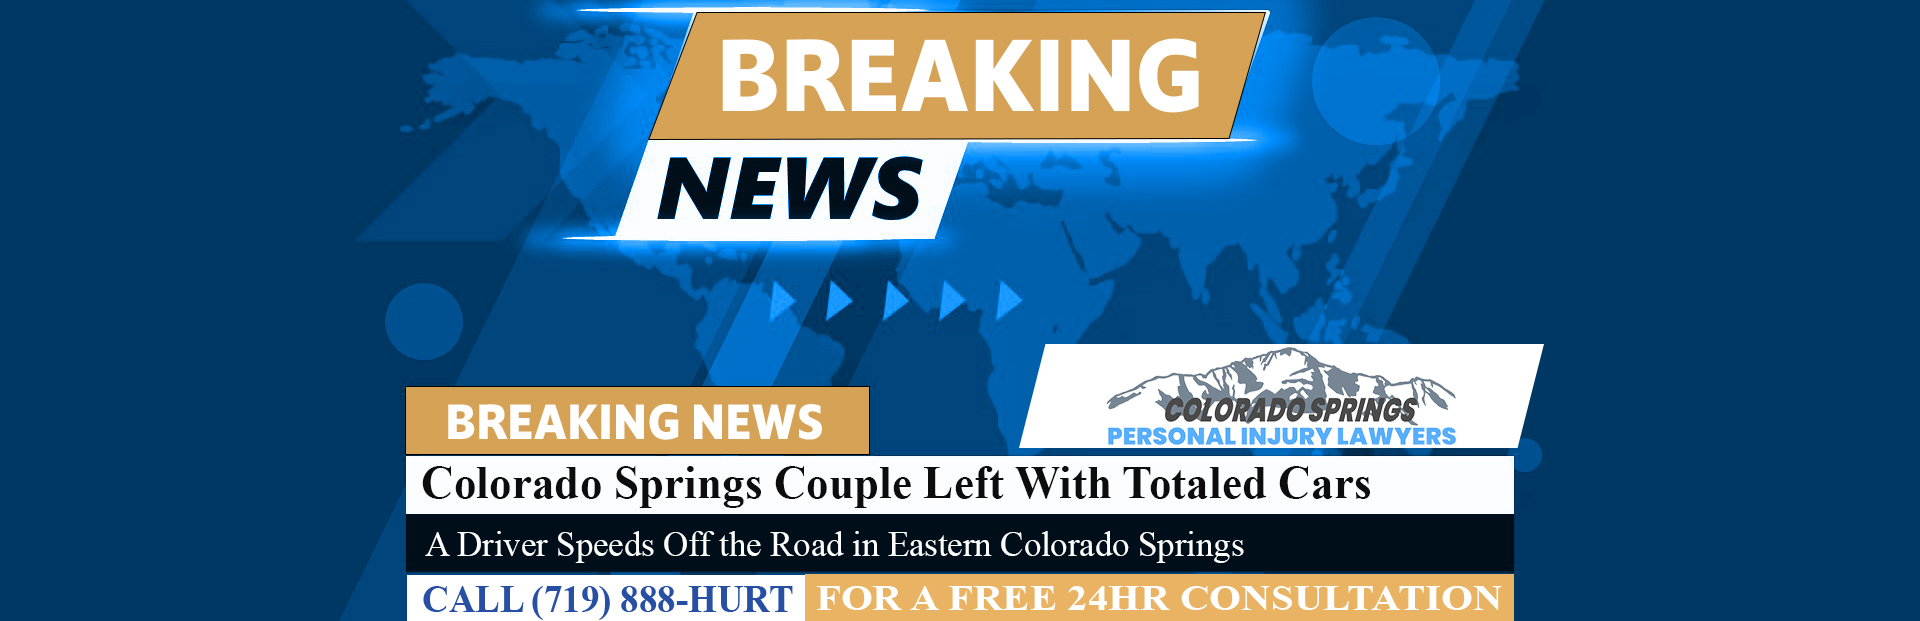 [04-23-24] Colorado Springs Couple Left With Totaled Cars After Driver Speeds Off the Road